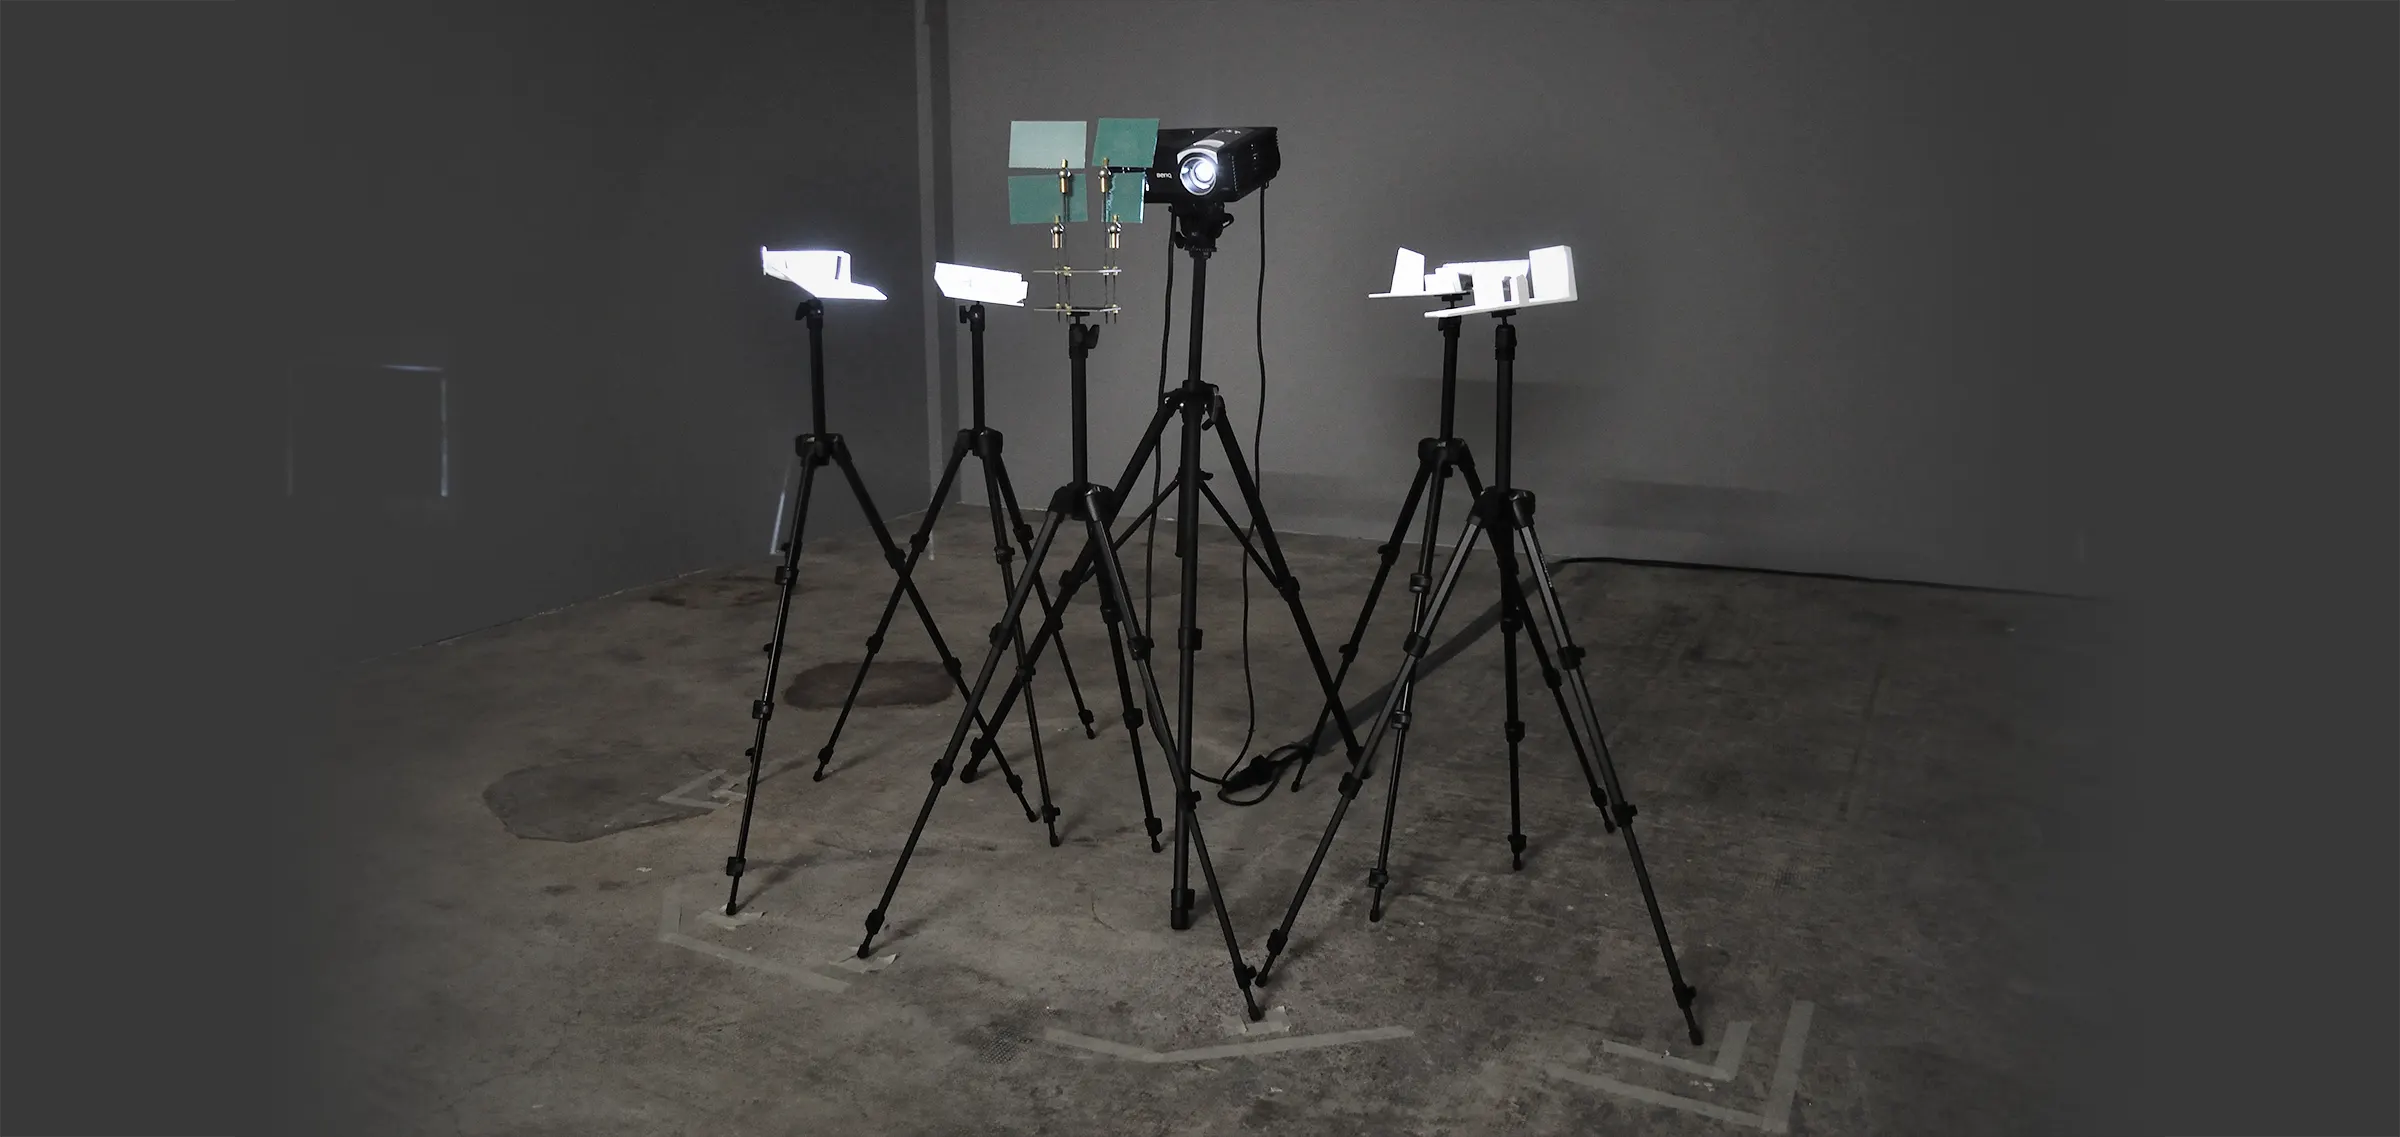 4 miniatures mounted on tripods. In their center a projector and another tripod with four small mirror to divide the light across all miniatures.